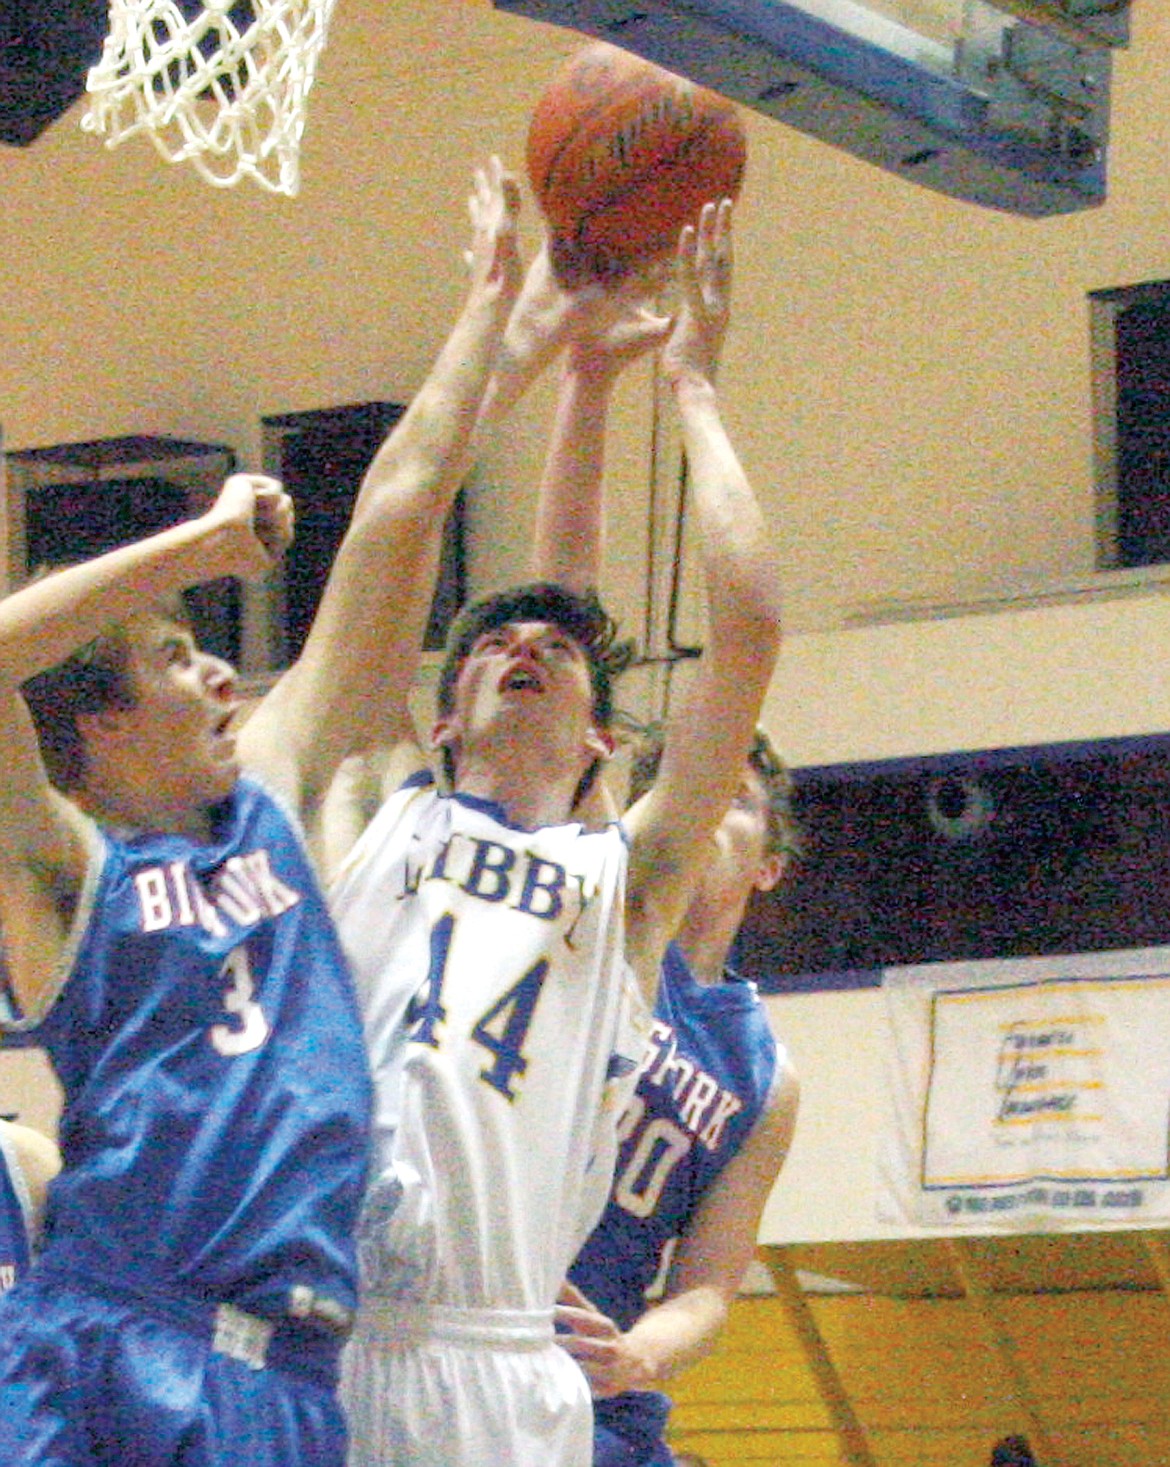 Senior Erik Lauer going in for a lay-up during the Loggers game against Bigfork on Saturday. (Bethany Rolfson/TWN)